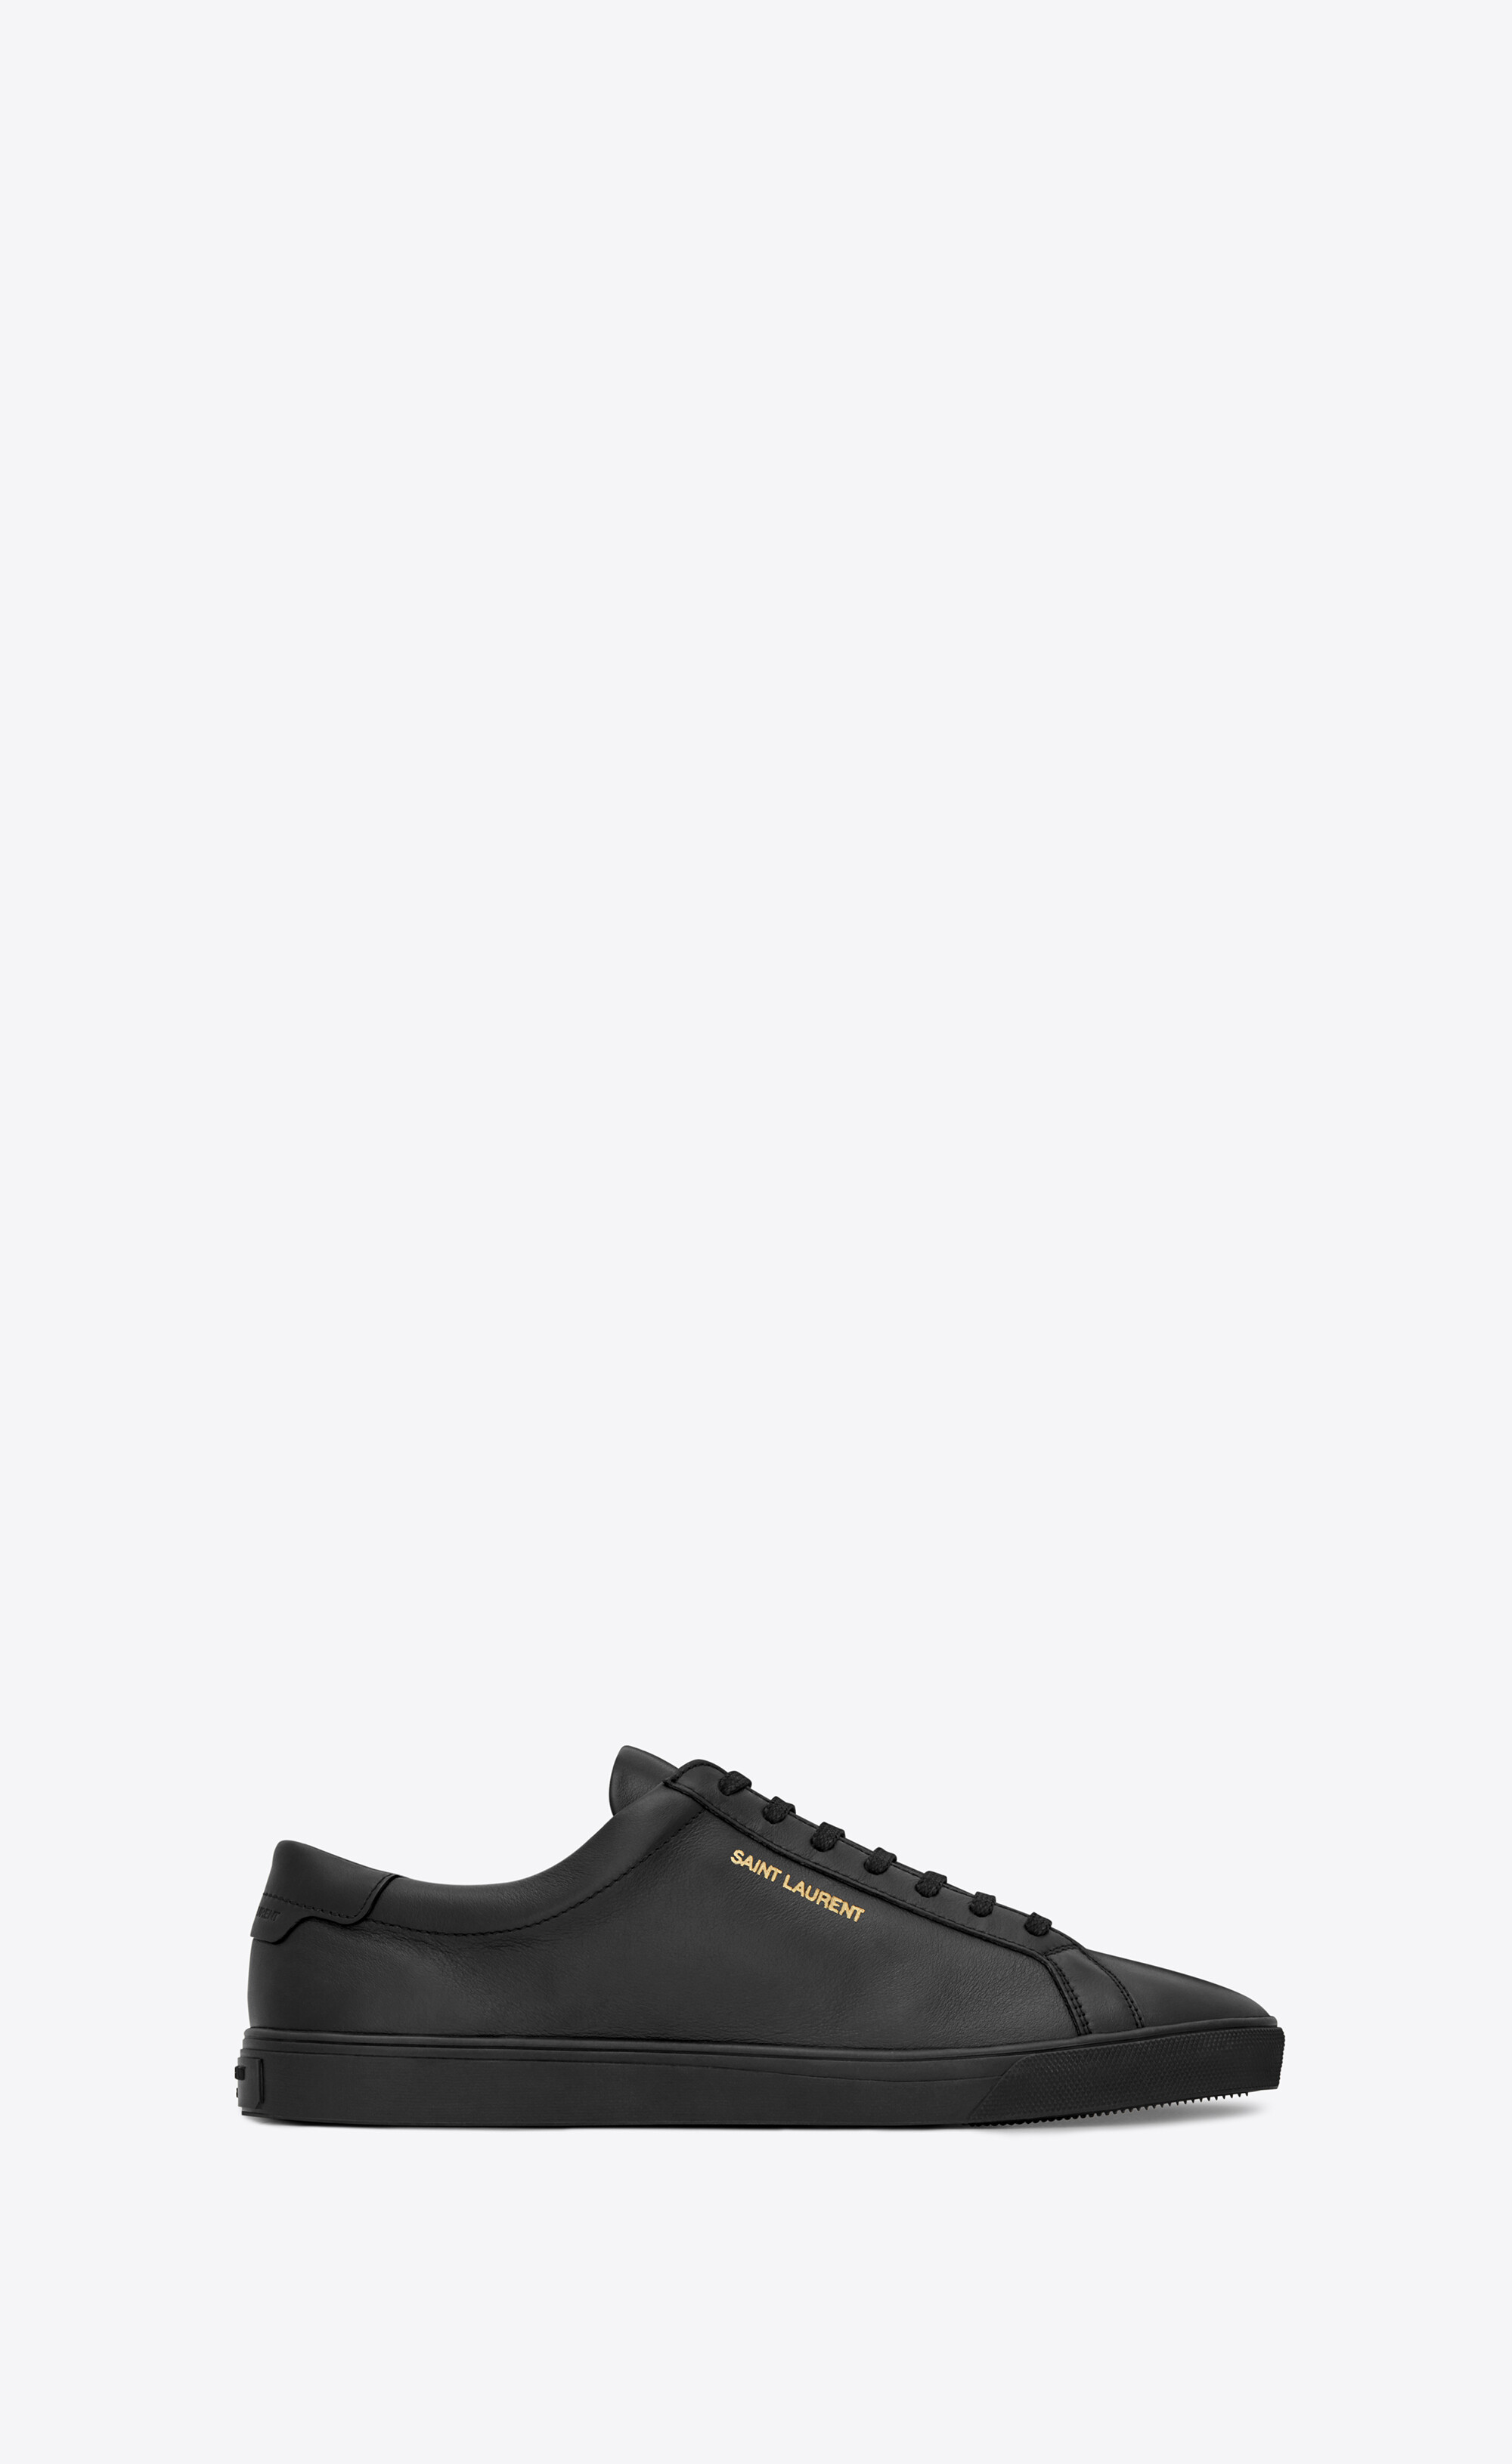 Andy sneakers in leather | Saint Laurent | YSL.com